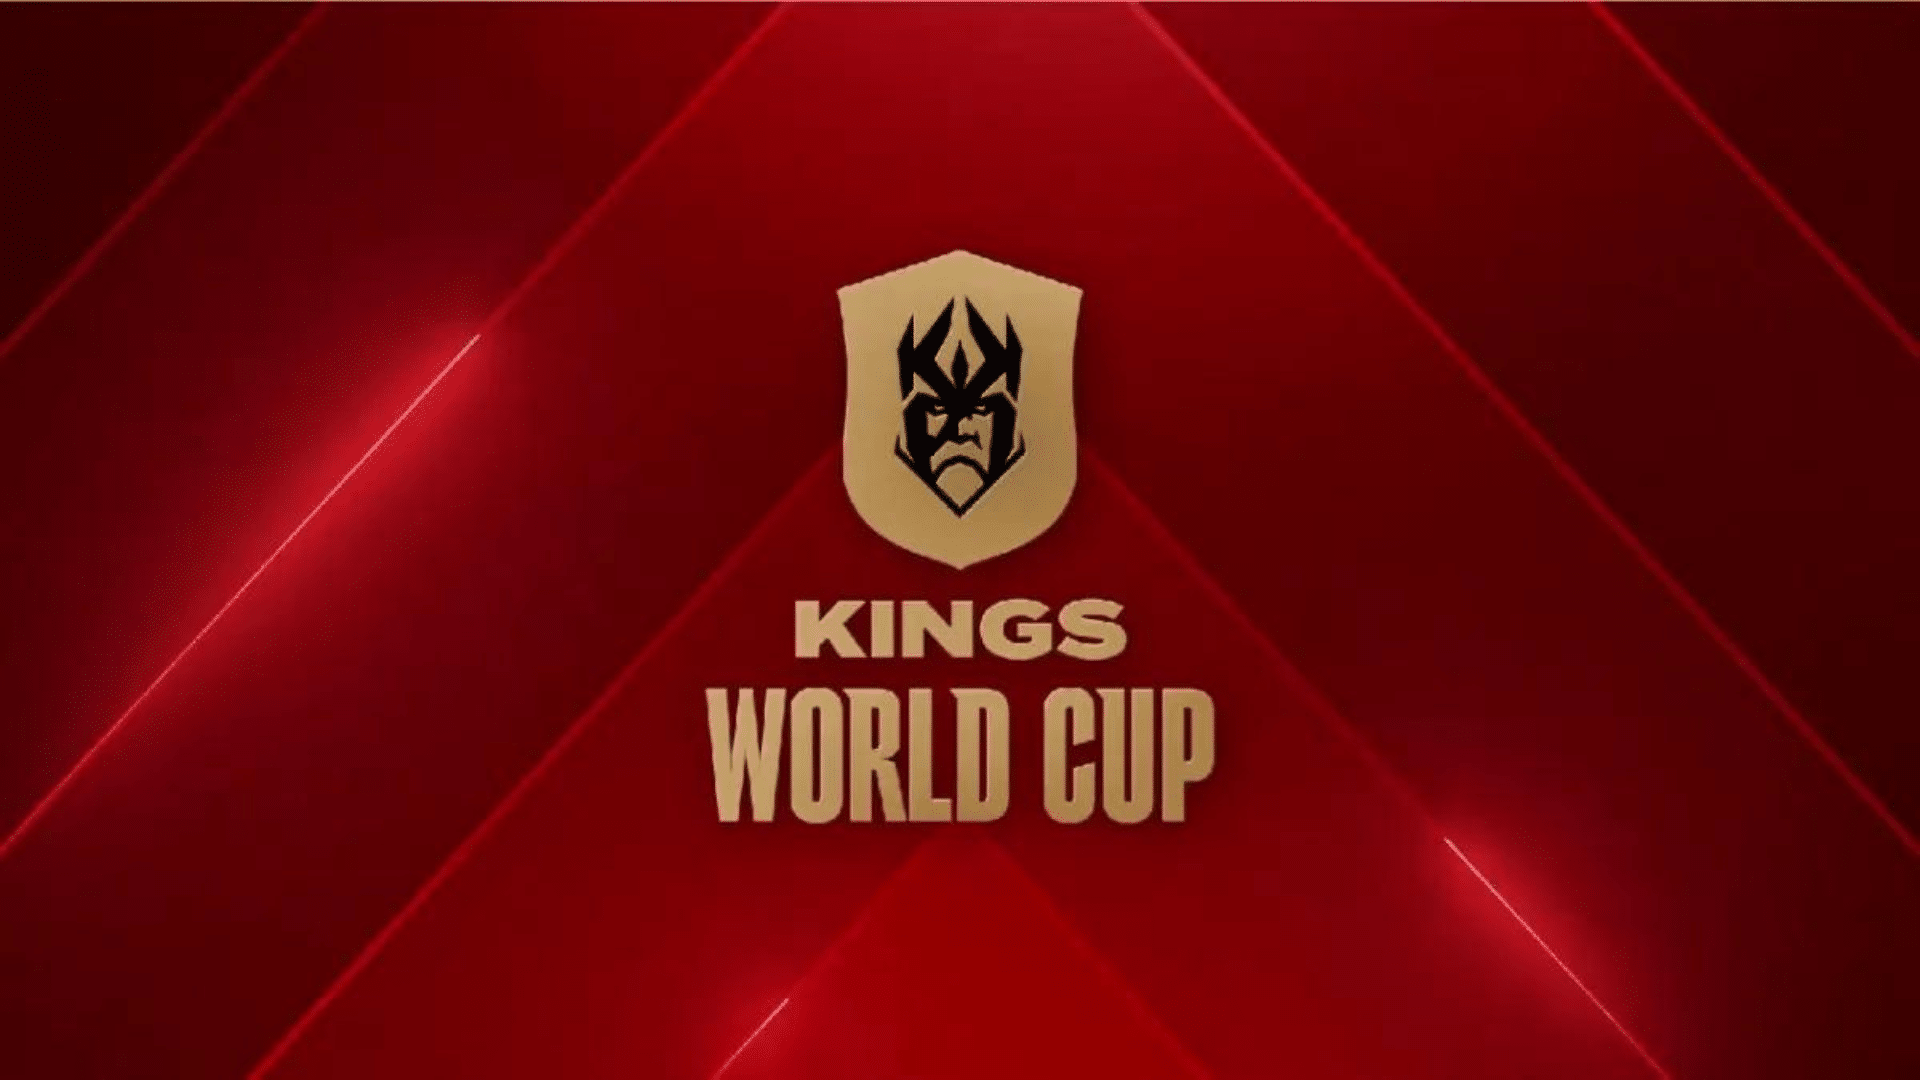 Kings World Cup